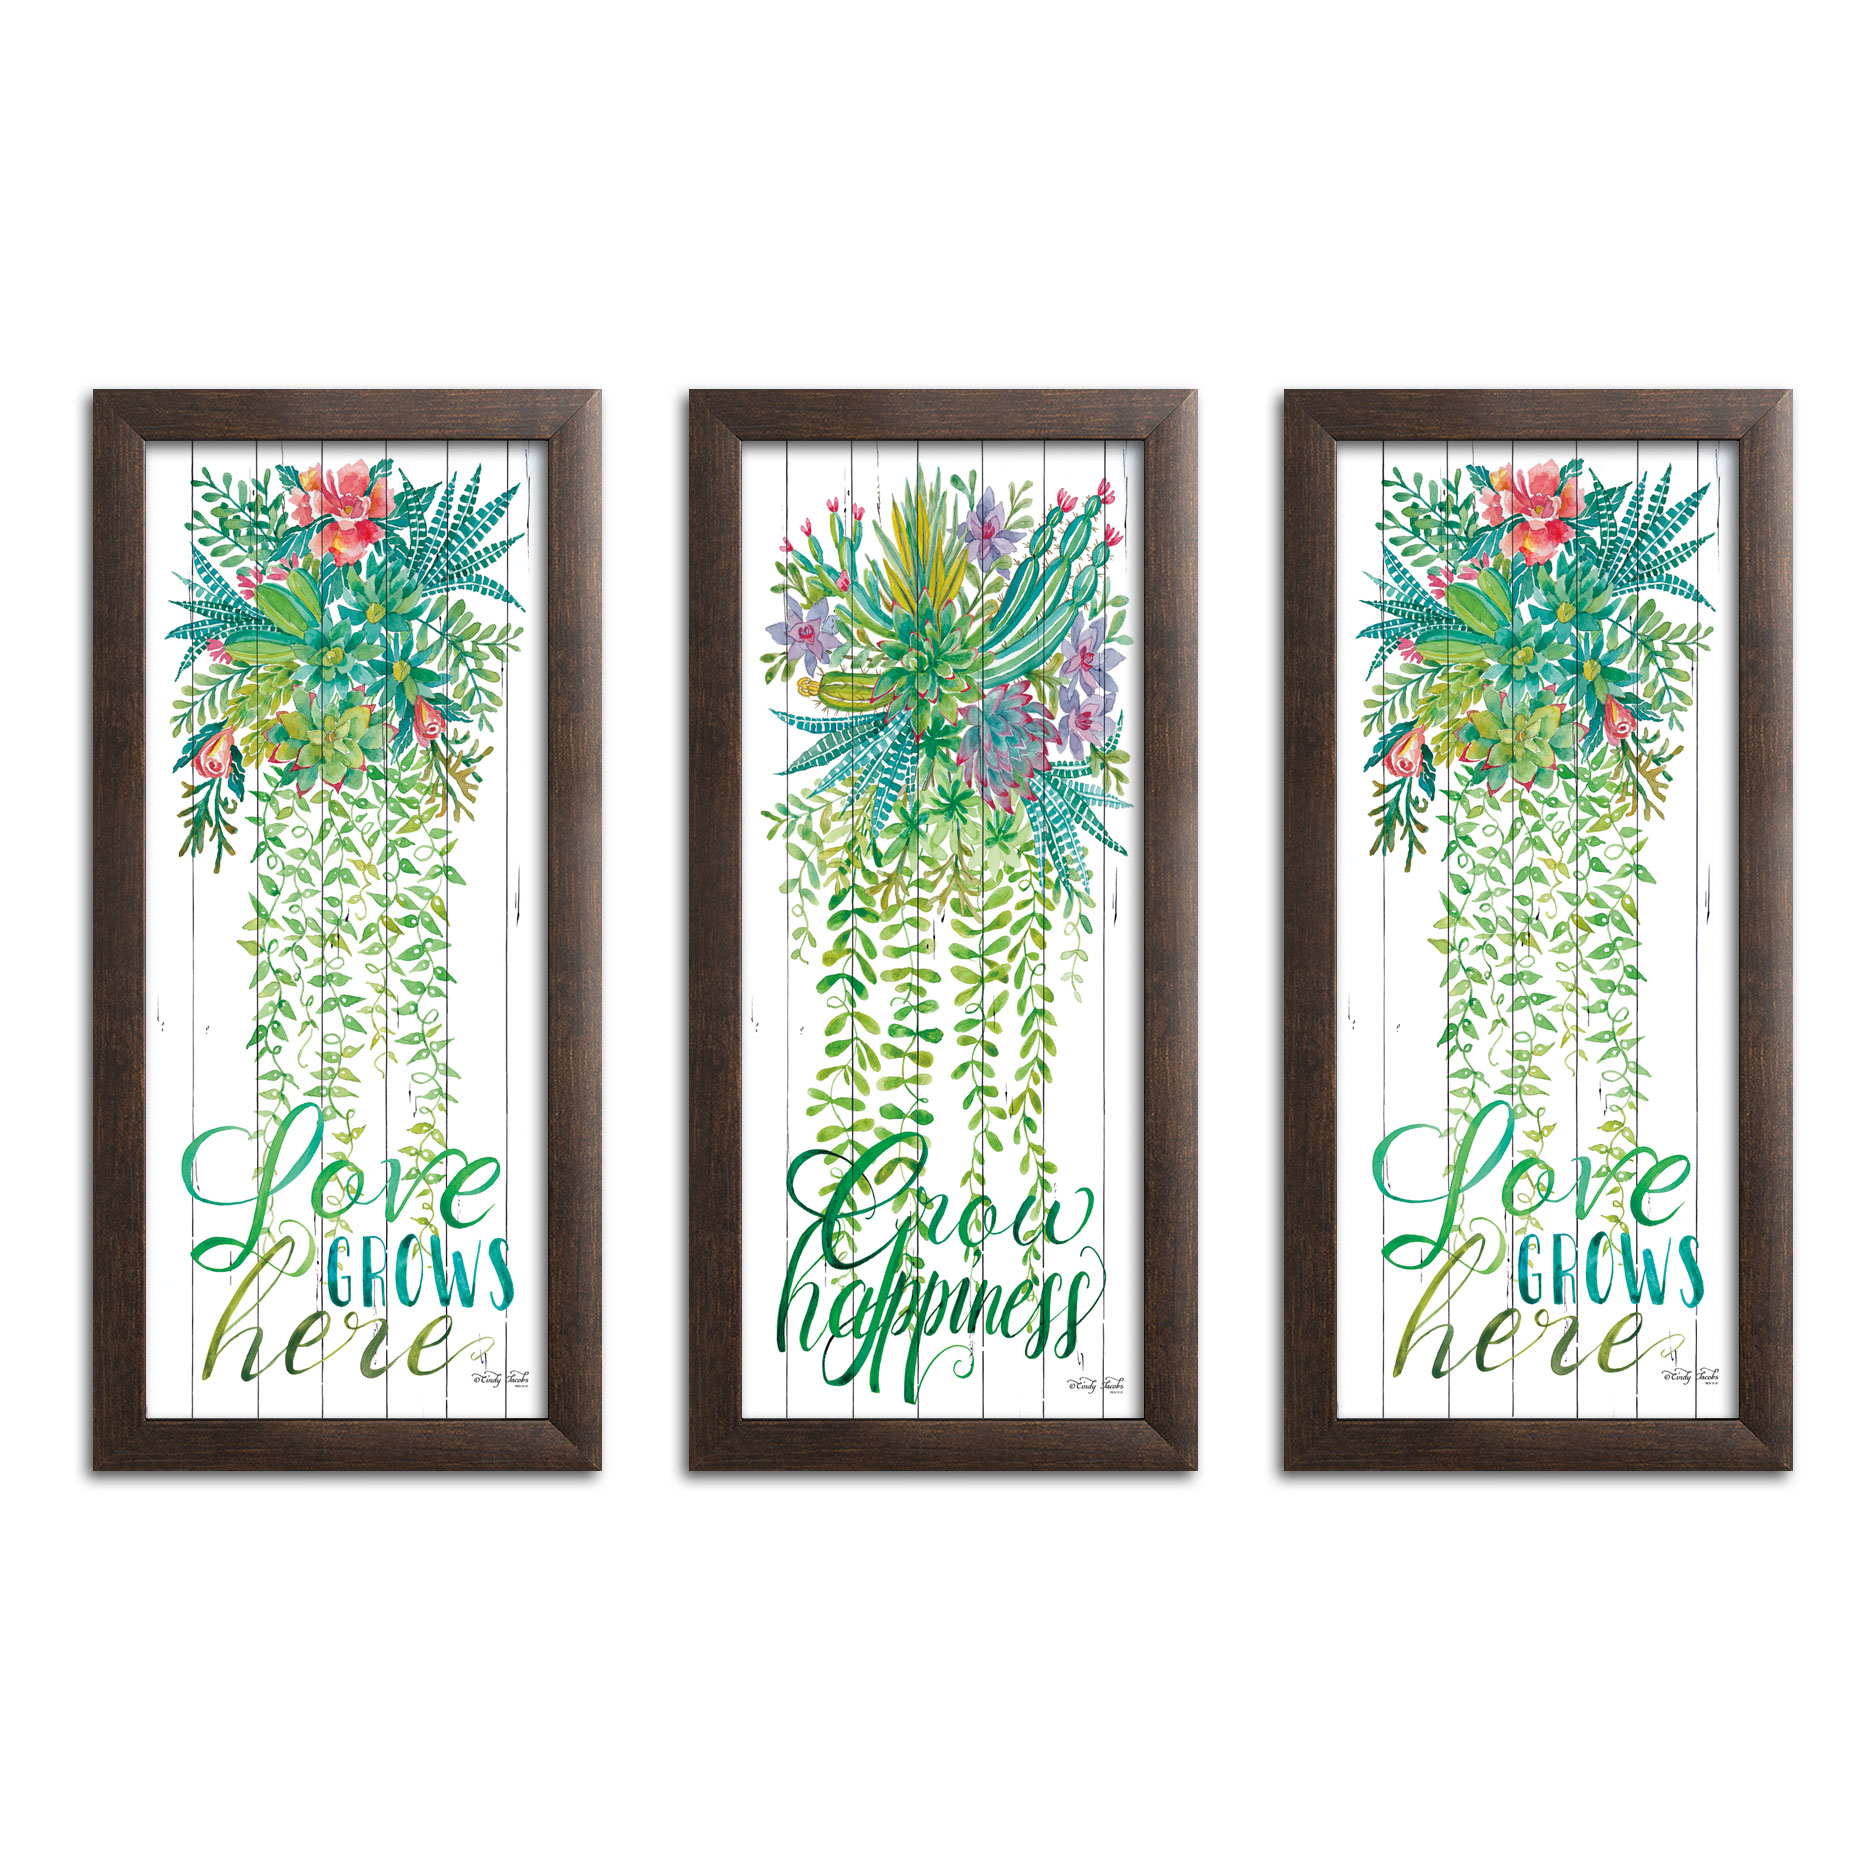 Gango Home Decor Cottage Love Grows Here, Grow Happiness, & Love Makes a House a Home by Cindy Jacobs (Ready to Hang); Three 8x18in Brown Framed Prints - image 1 of 6